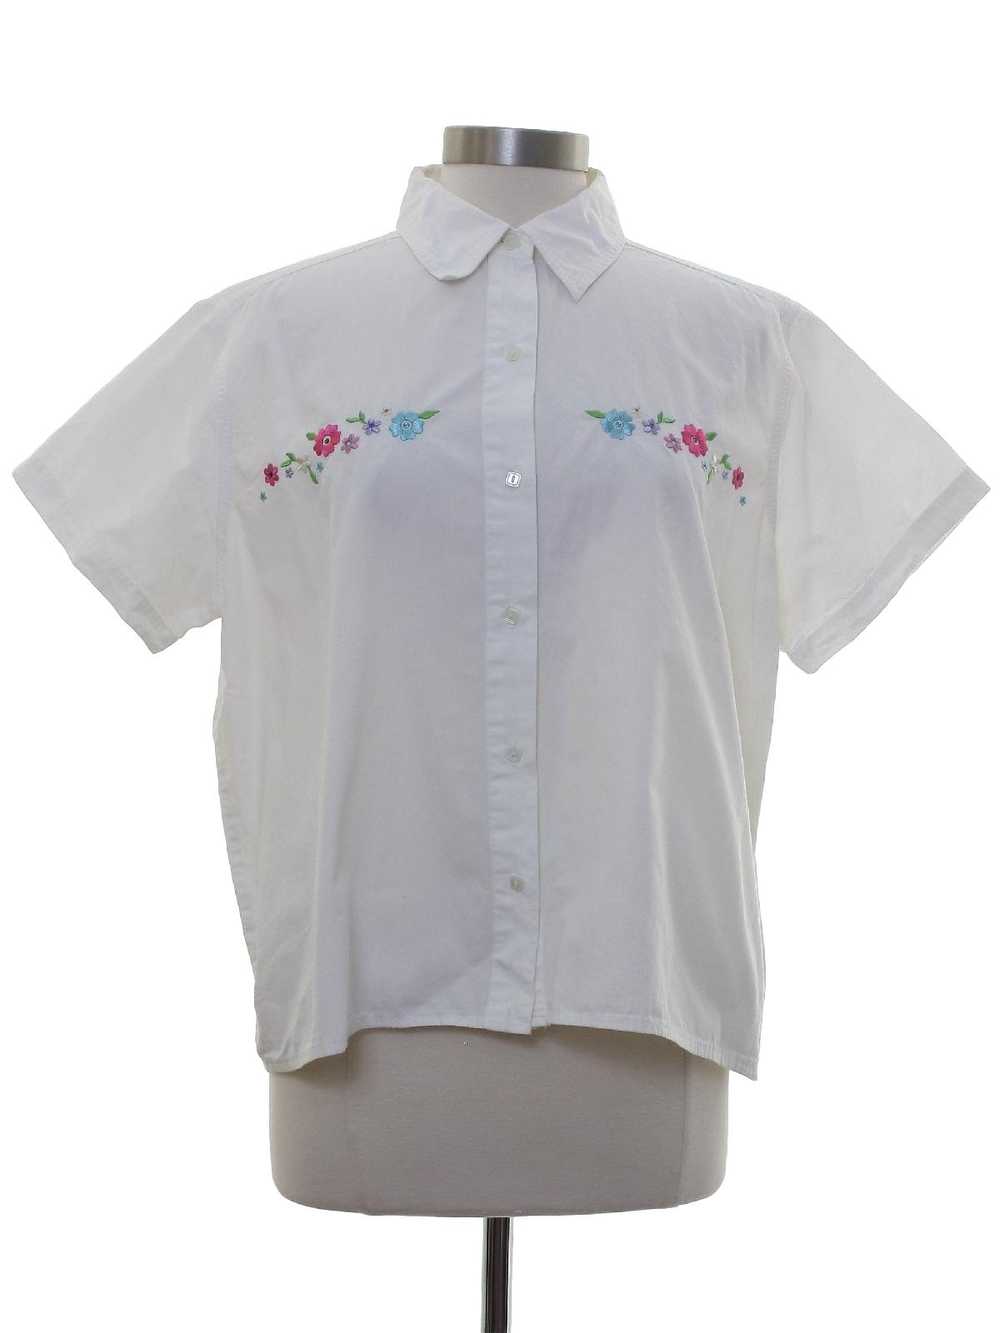 1990's Womens Embroidered Shirt - image 1